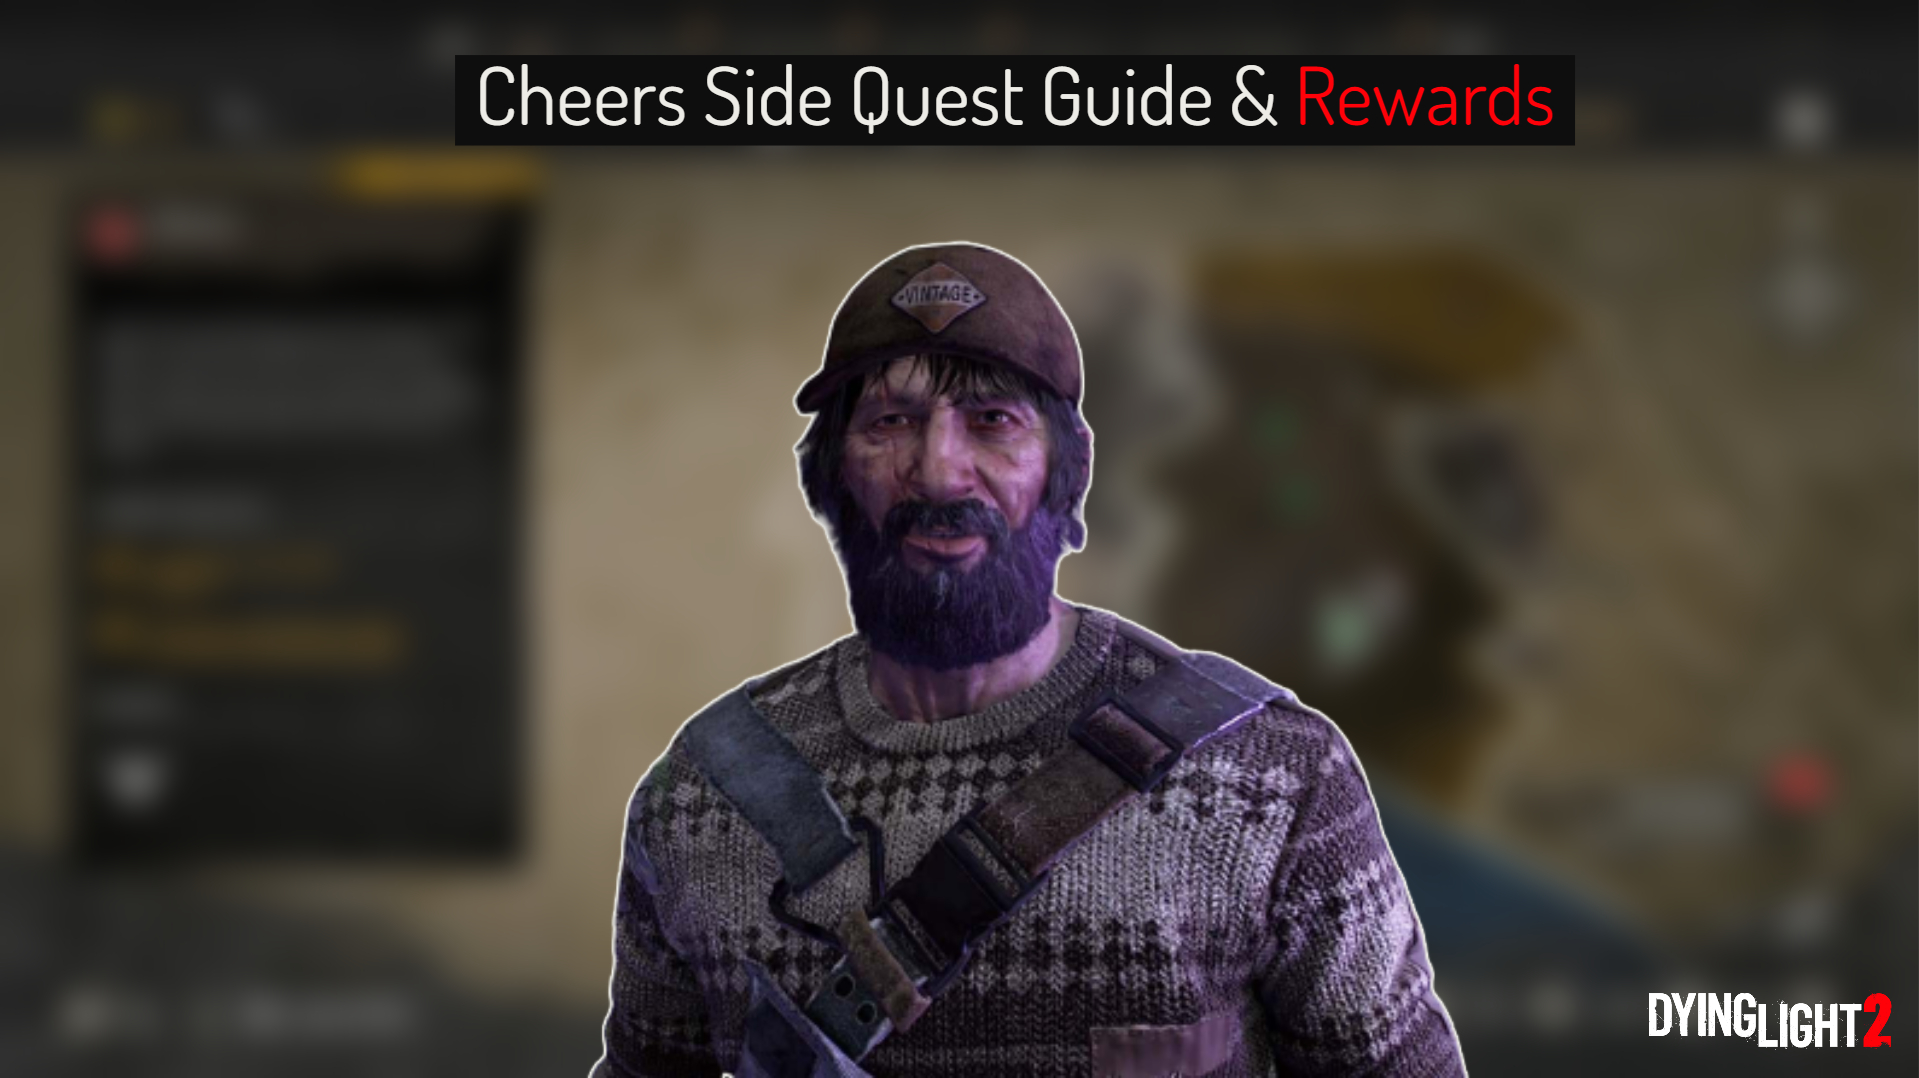 You are currently viewing Dying Light 2: Cheers Side Quest Guide & Rewards